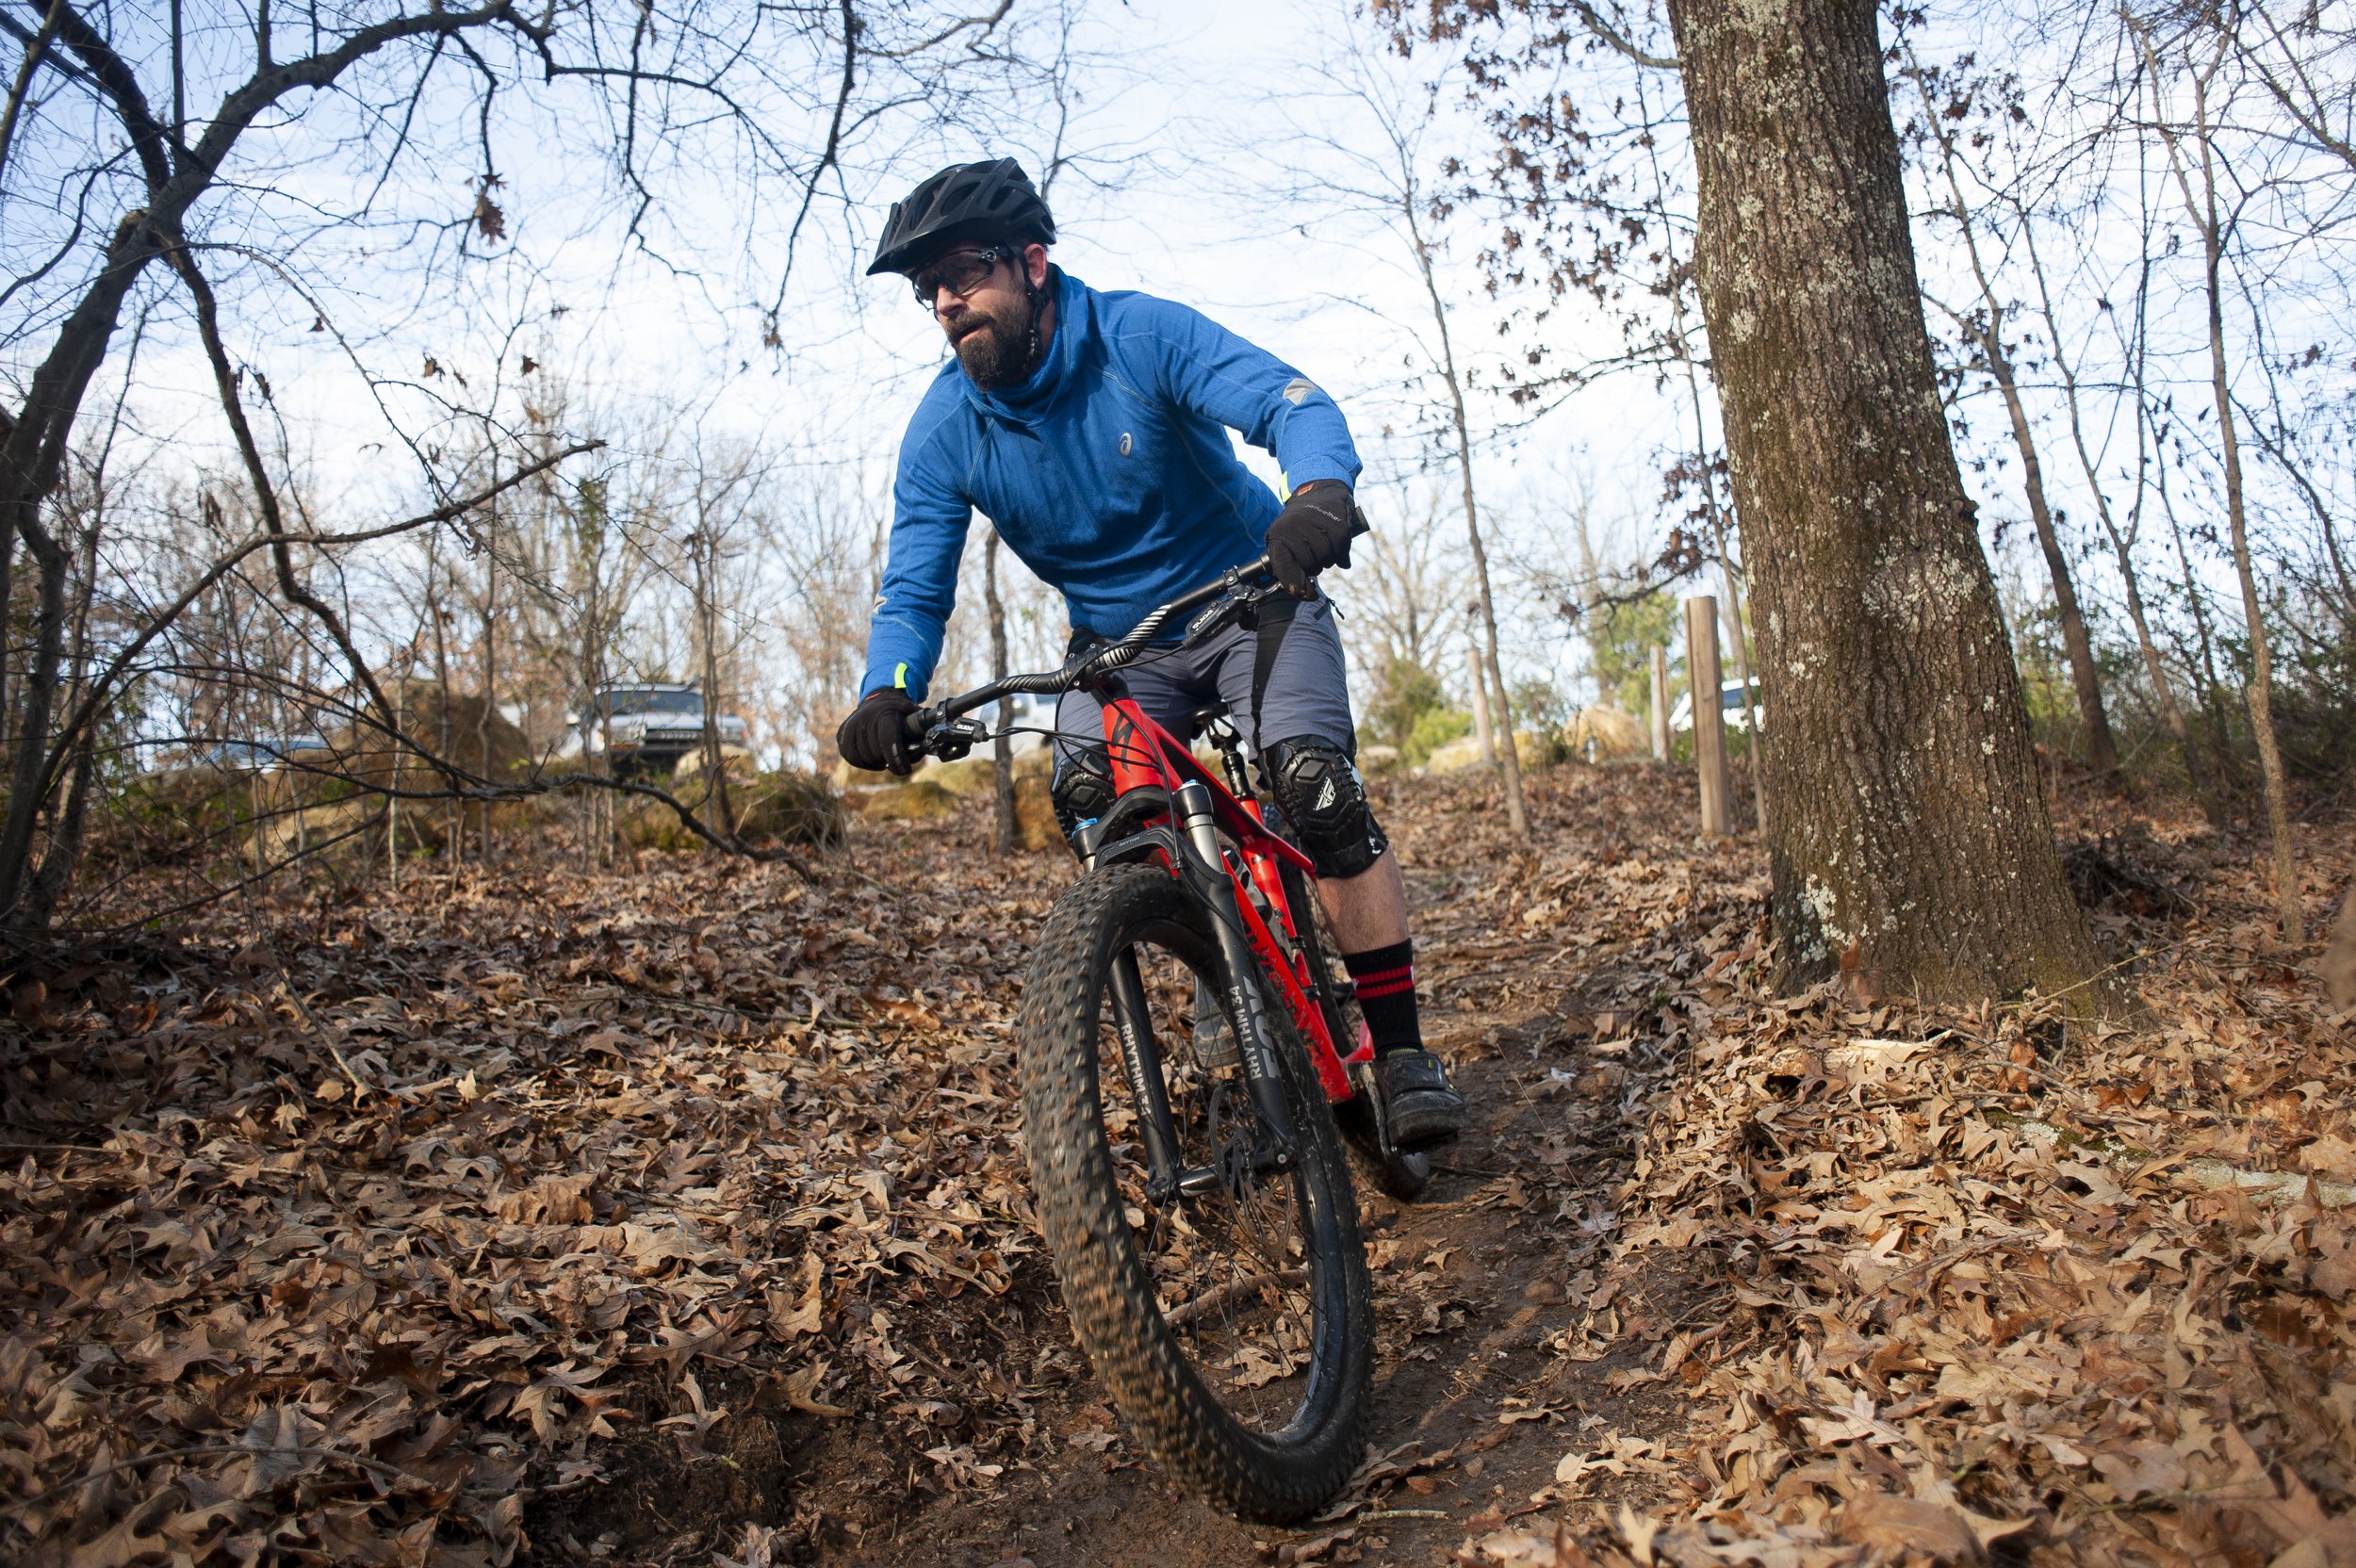  Dalton Marshall of Jonesboro starts making his way around a trail while riding with a group of cyclists Wednesday, Dec. 19 at Bono Lake in northeast Arkansas.  